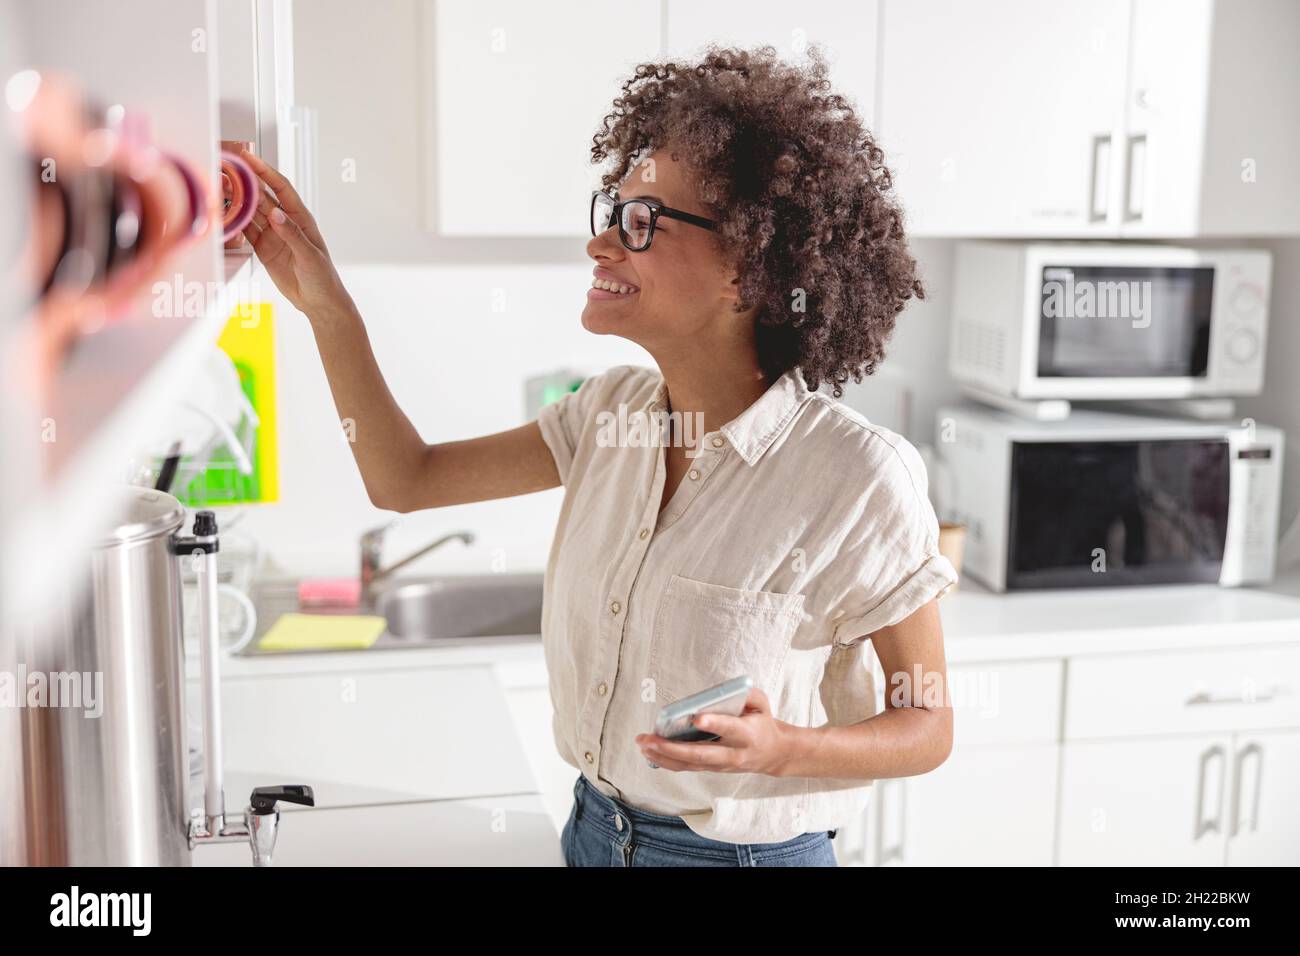 Happy Afro American lady taking a cup off the shelf Stock Photo